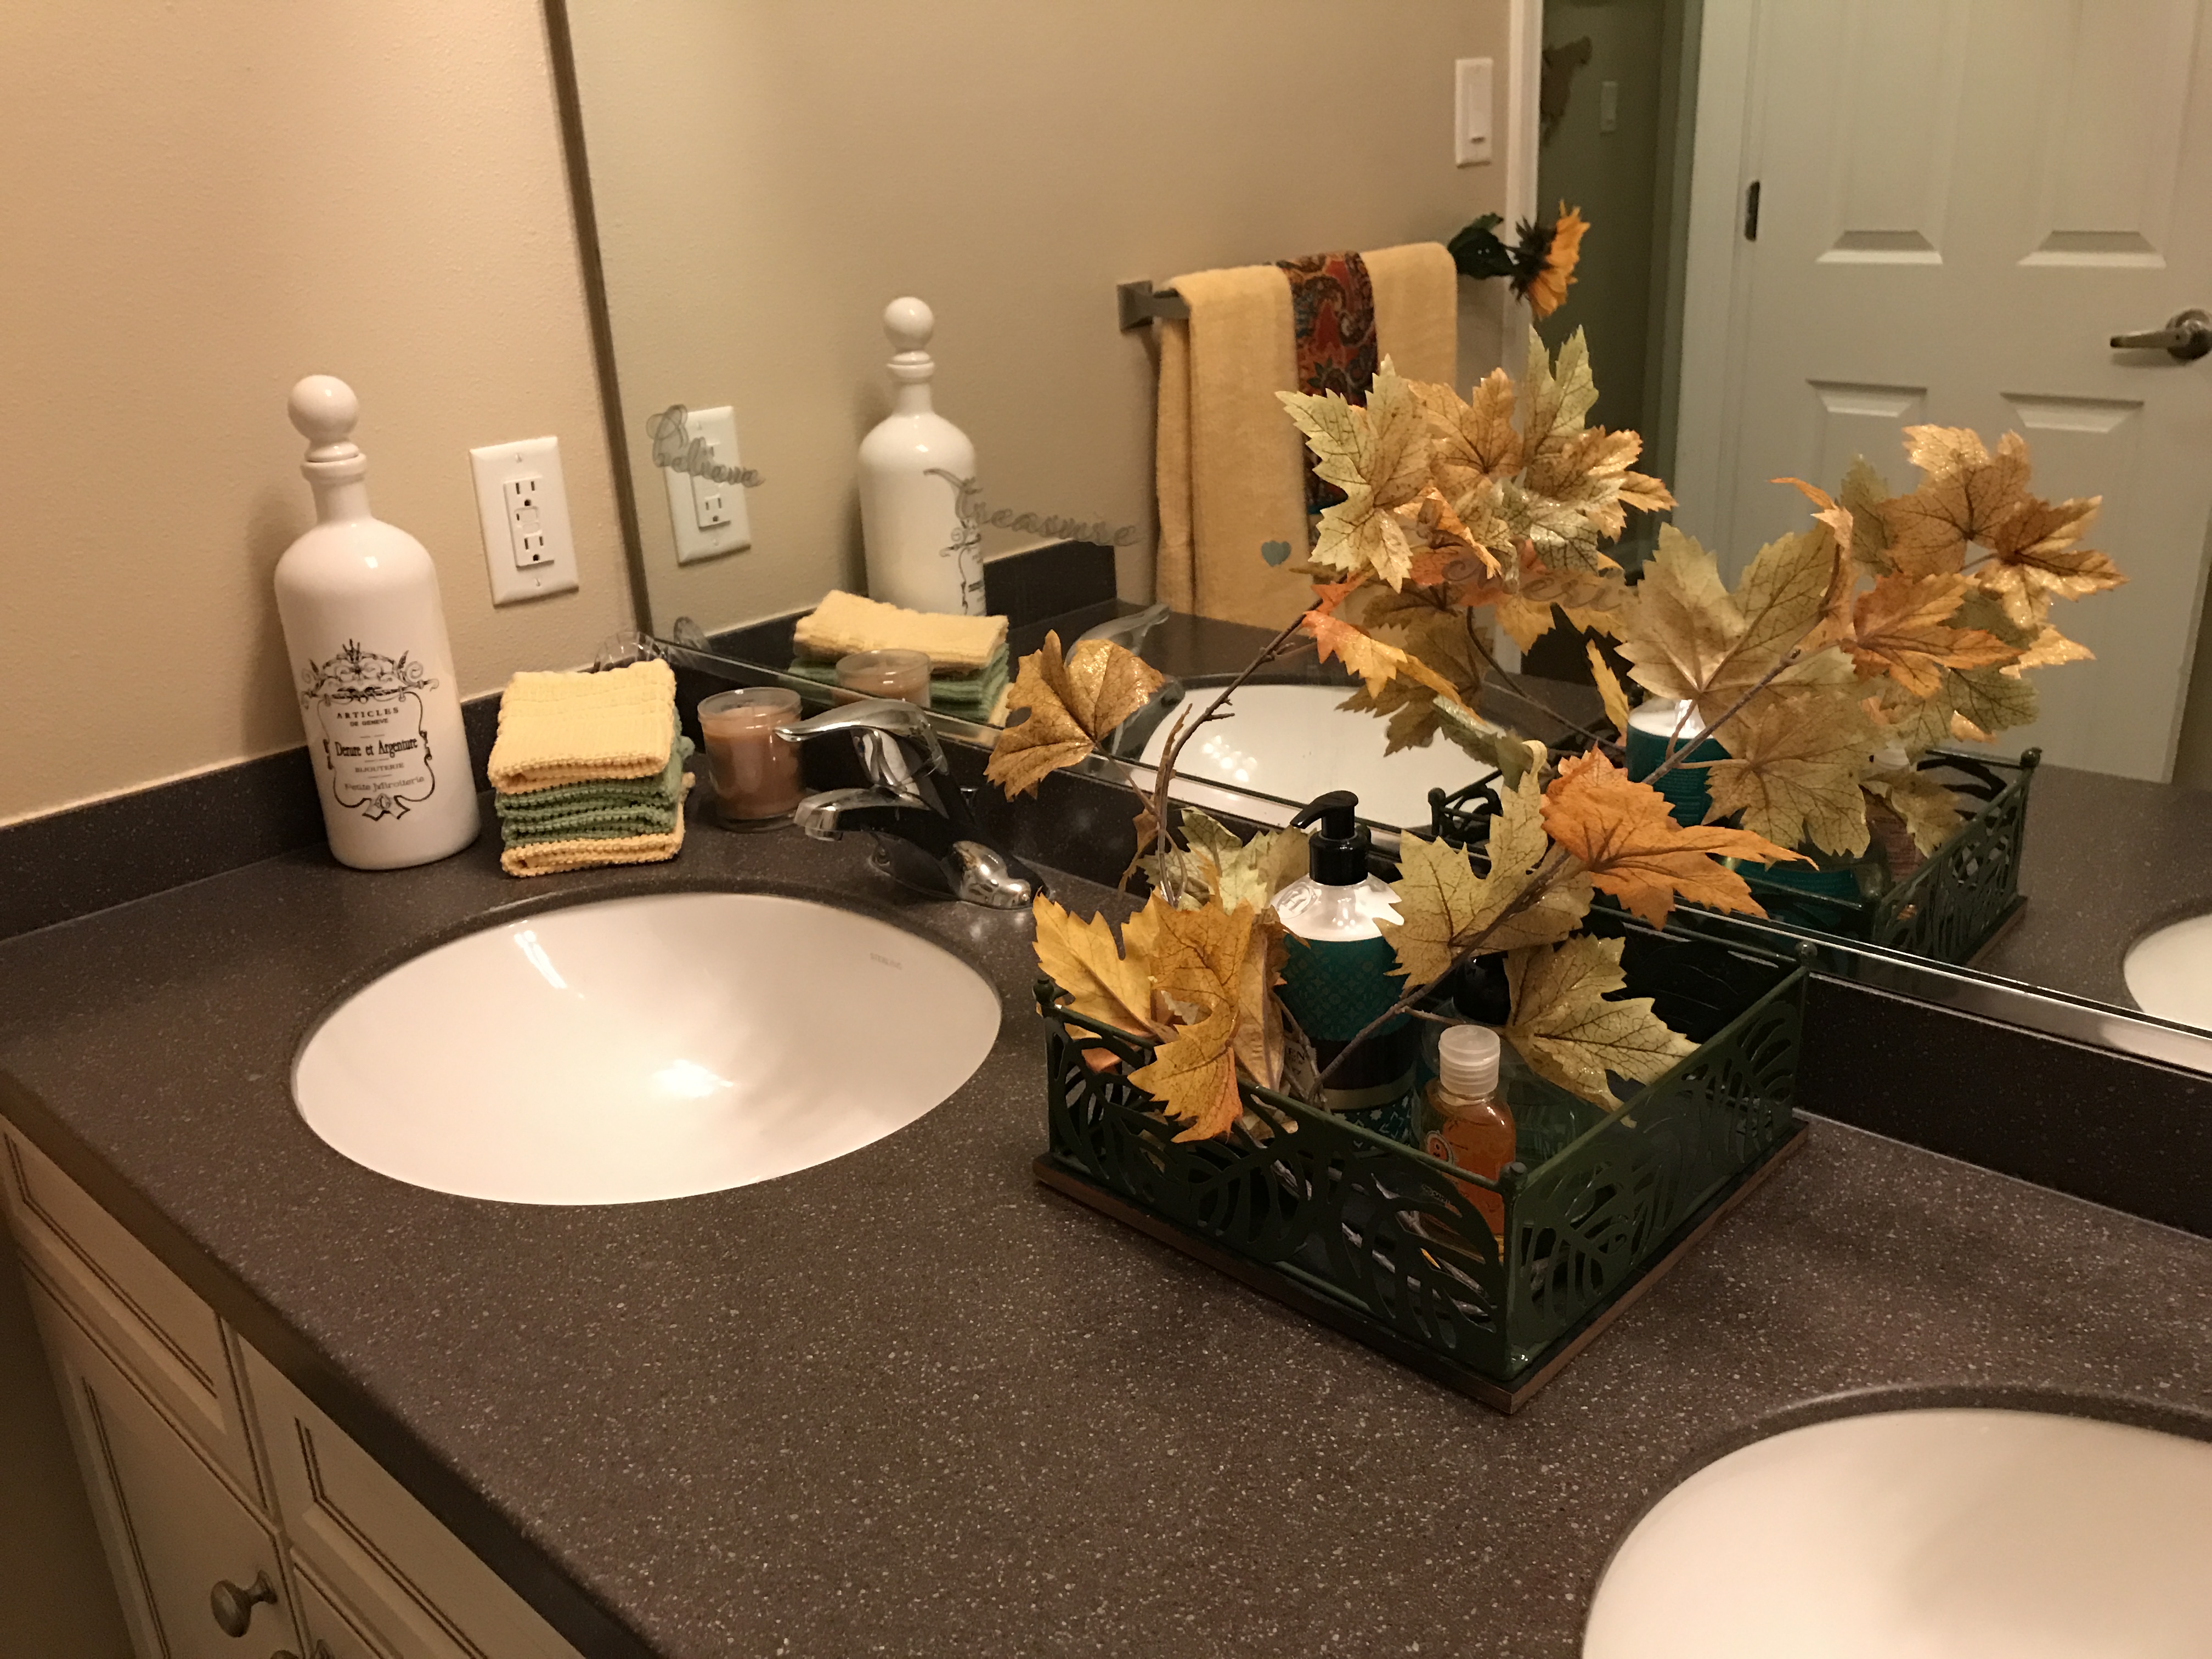 Accents on the sink were featured in green and yellow. The tray features soap and lotion buried in green and yellow leaves. This is a whole stem and the steam was twisted in the needed direction.